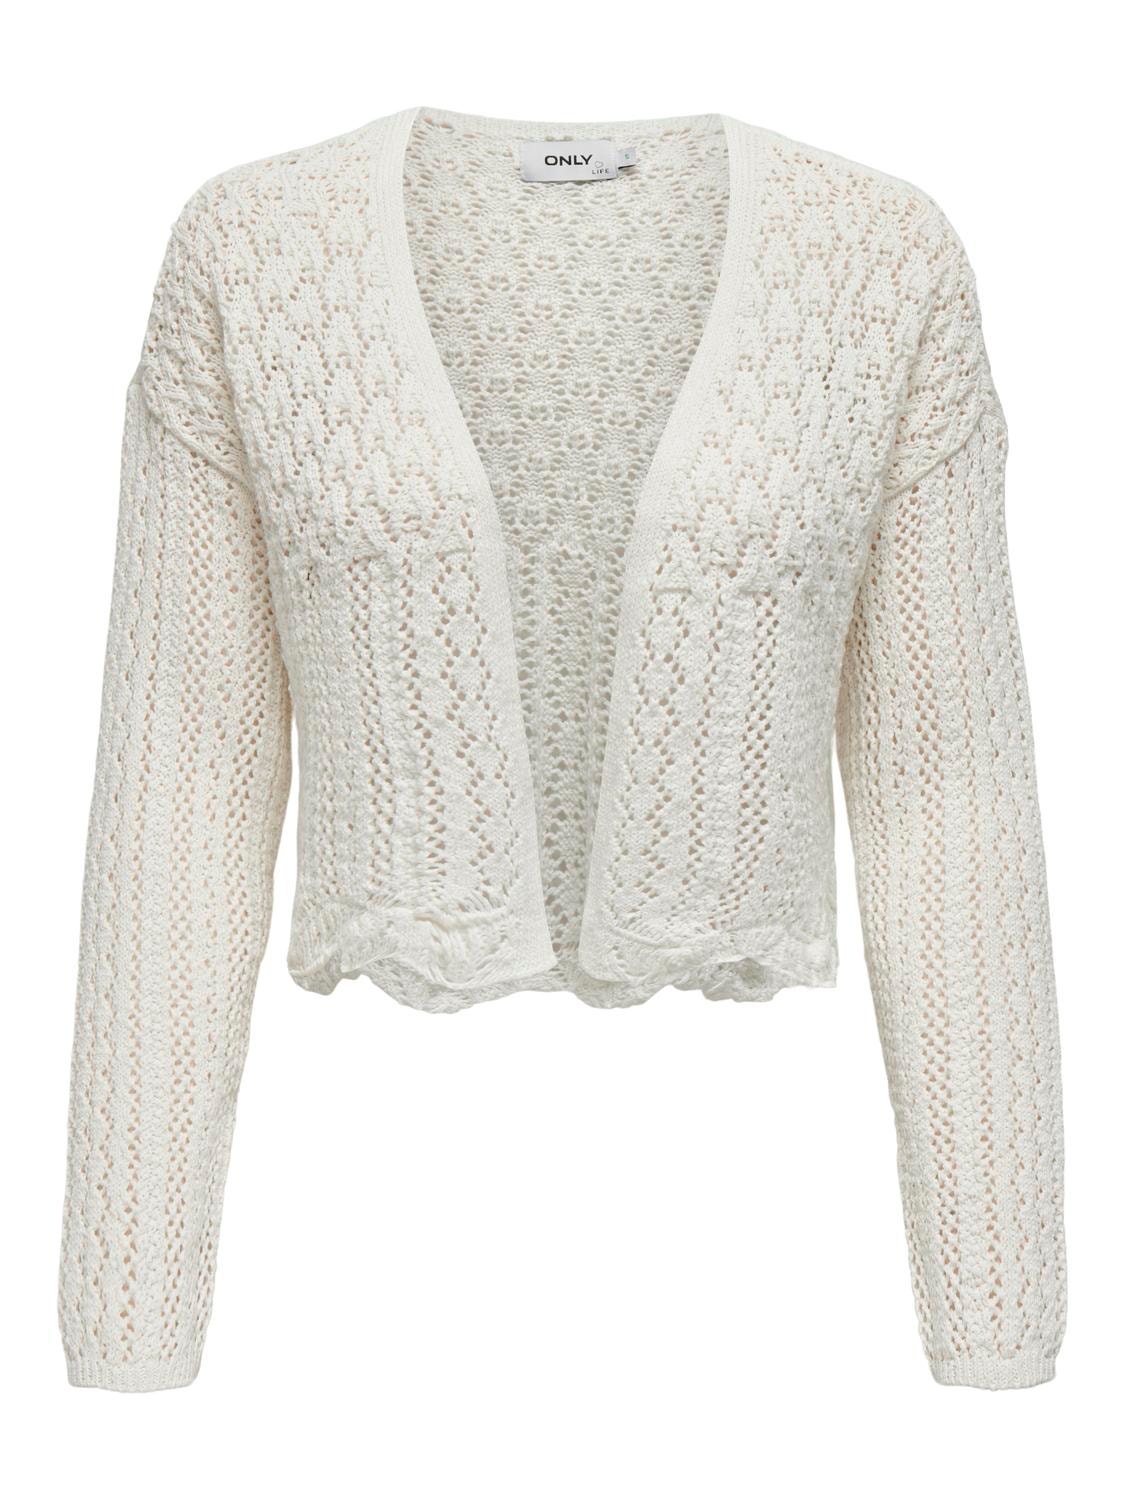 ONLY Cropped knit cardigan -Cloud Dancer - 15290744